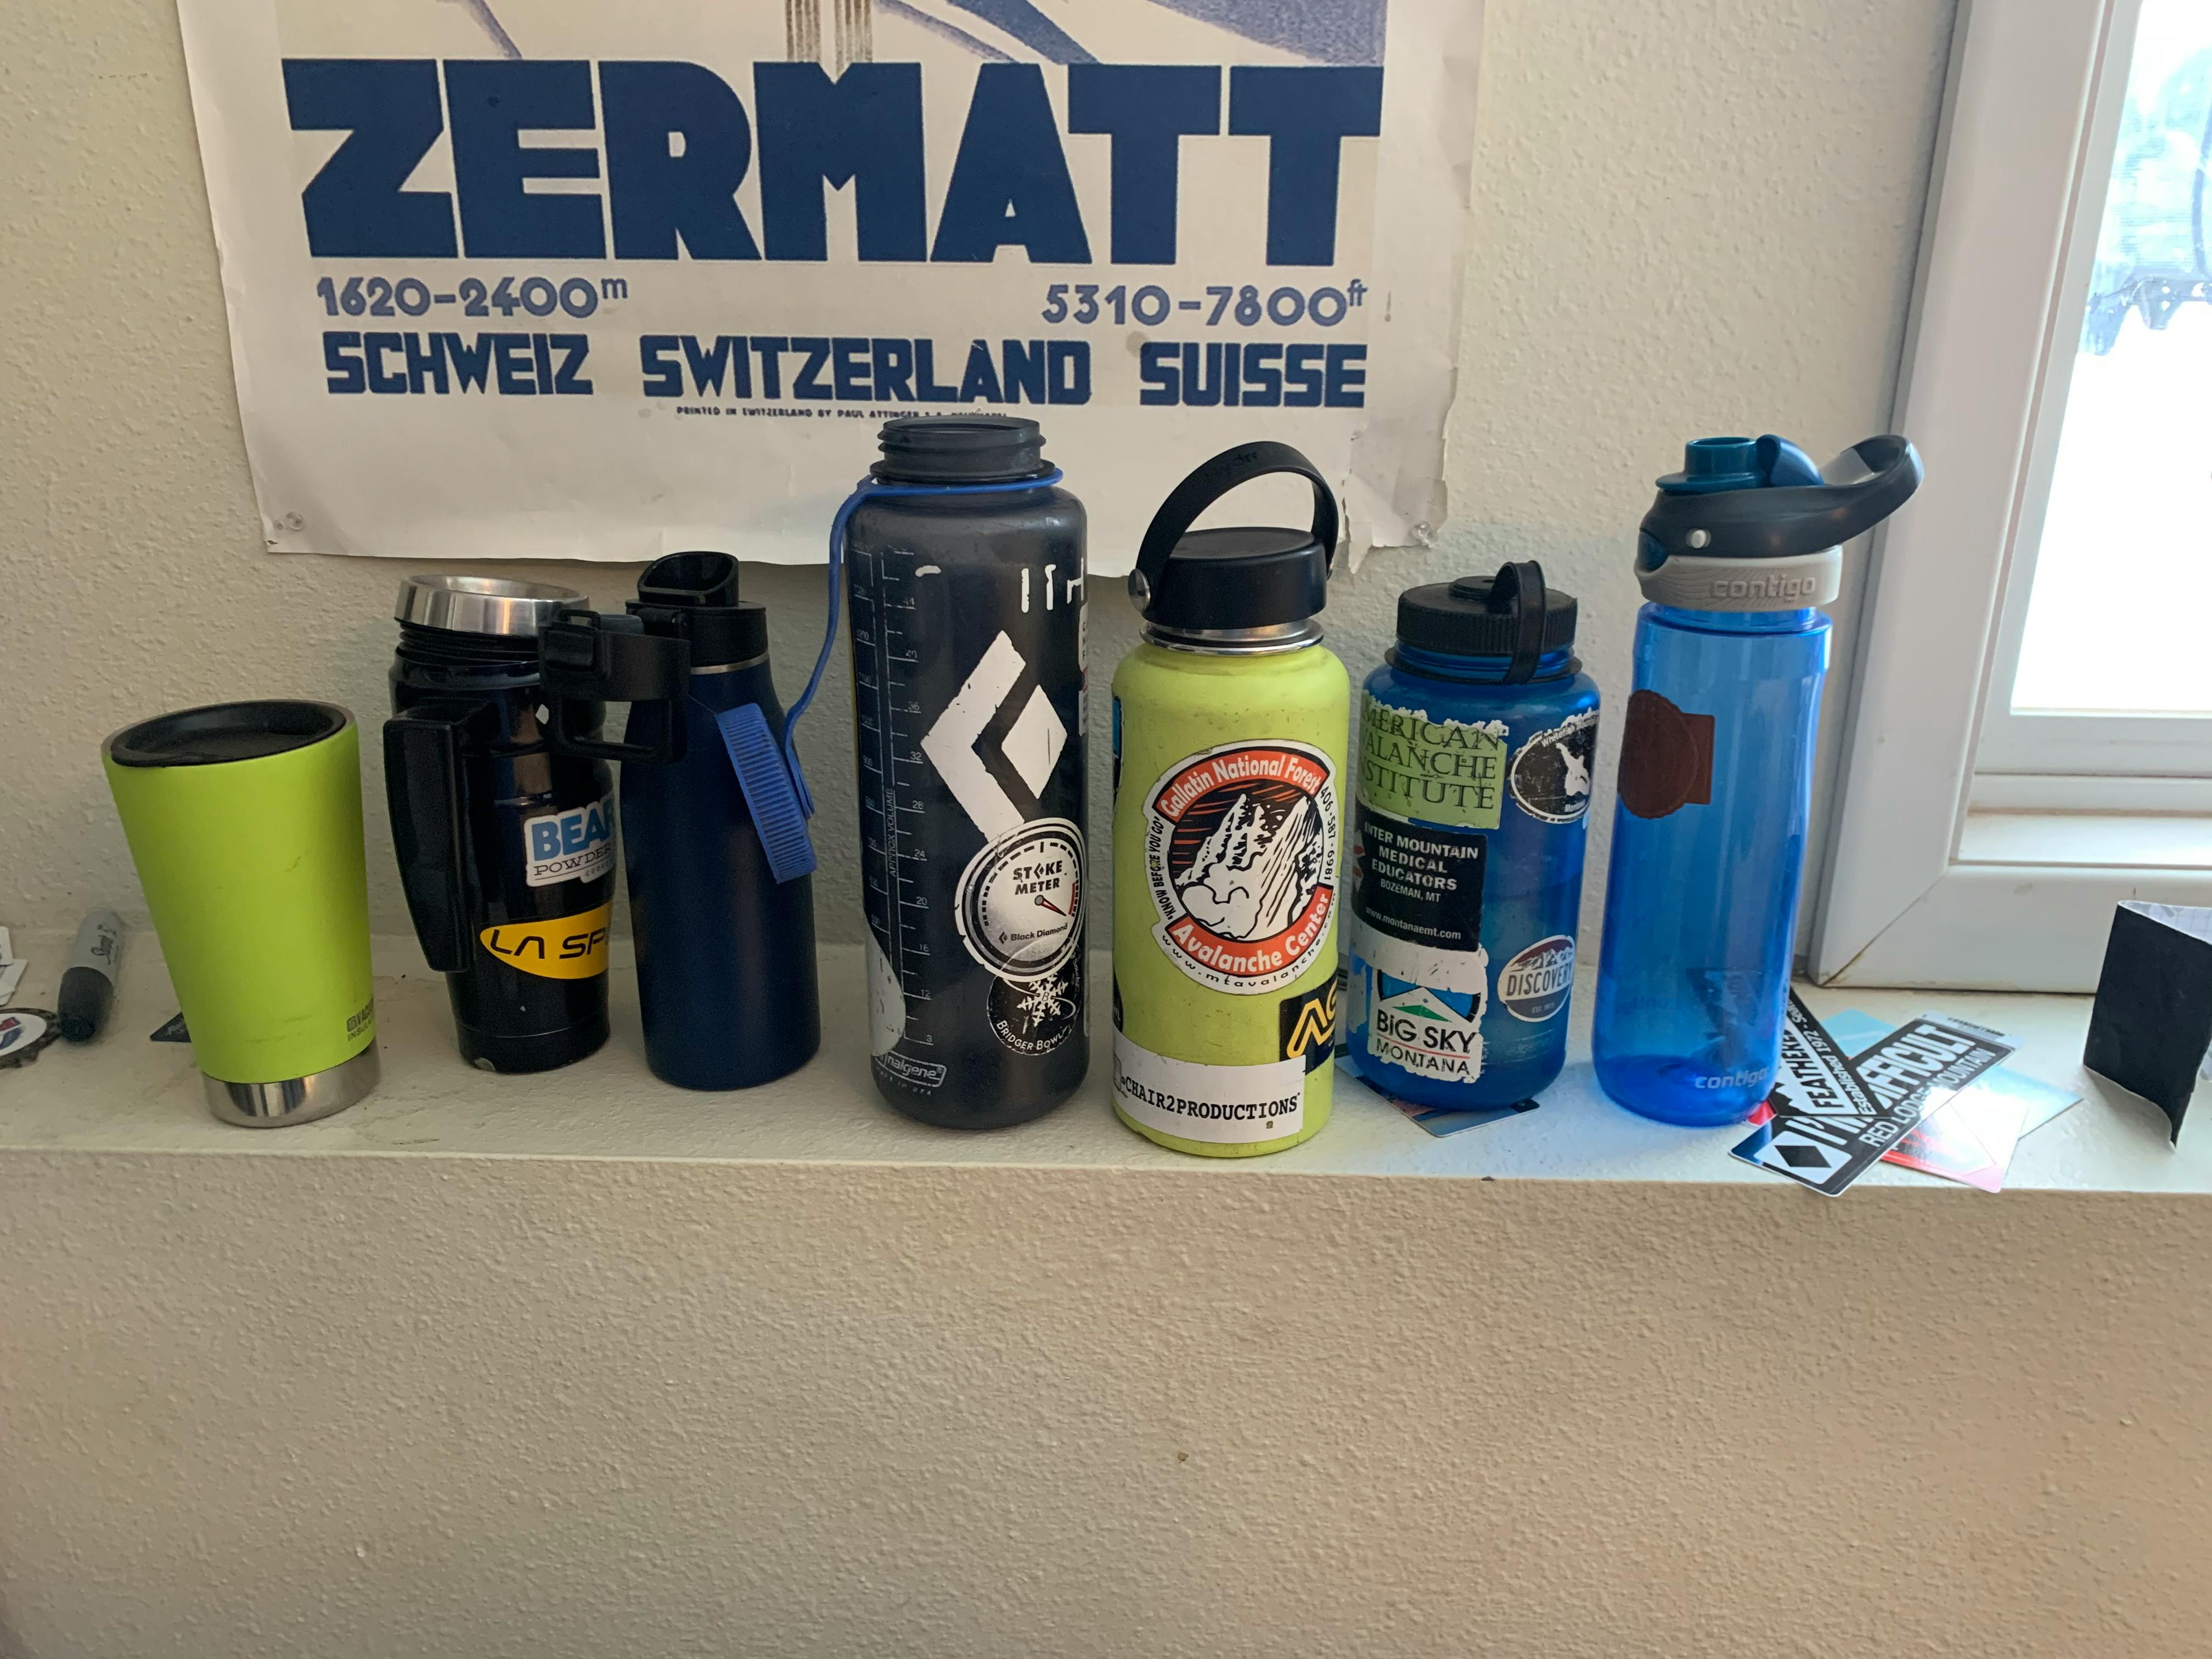 A row of reusable water bottles and thermos containers on a shelf